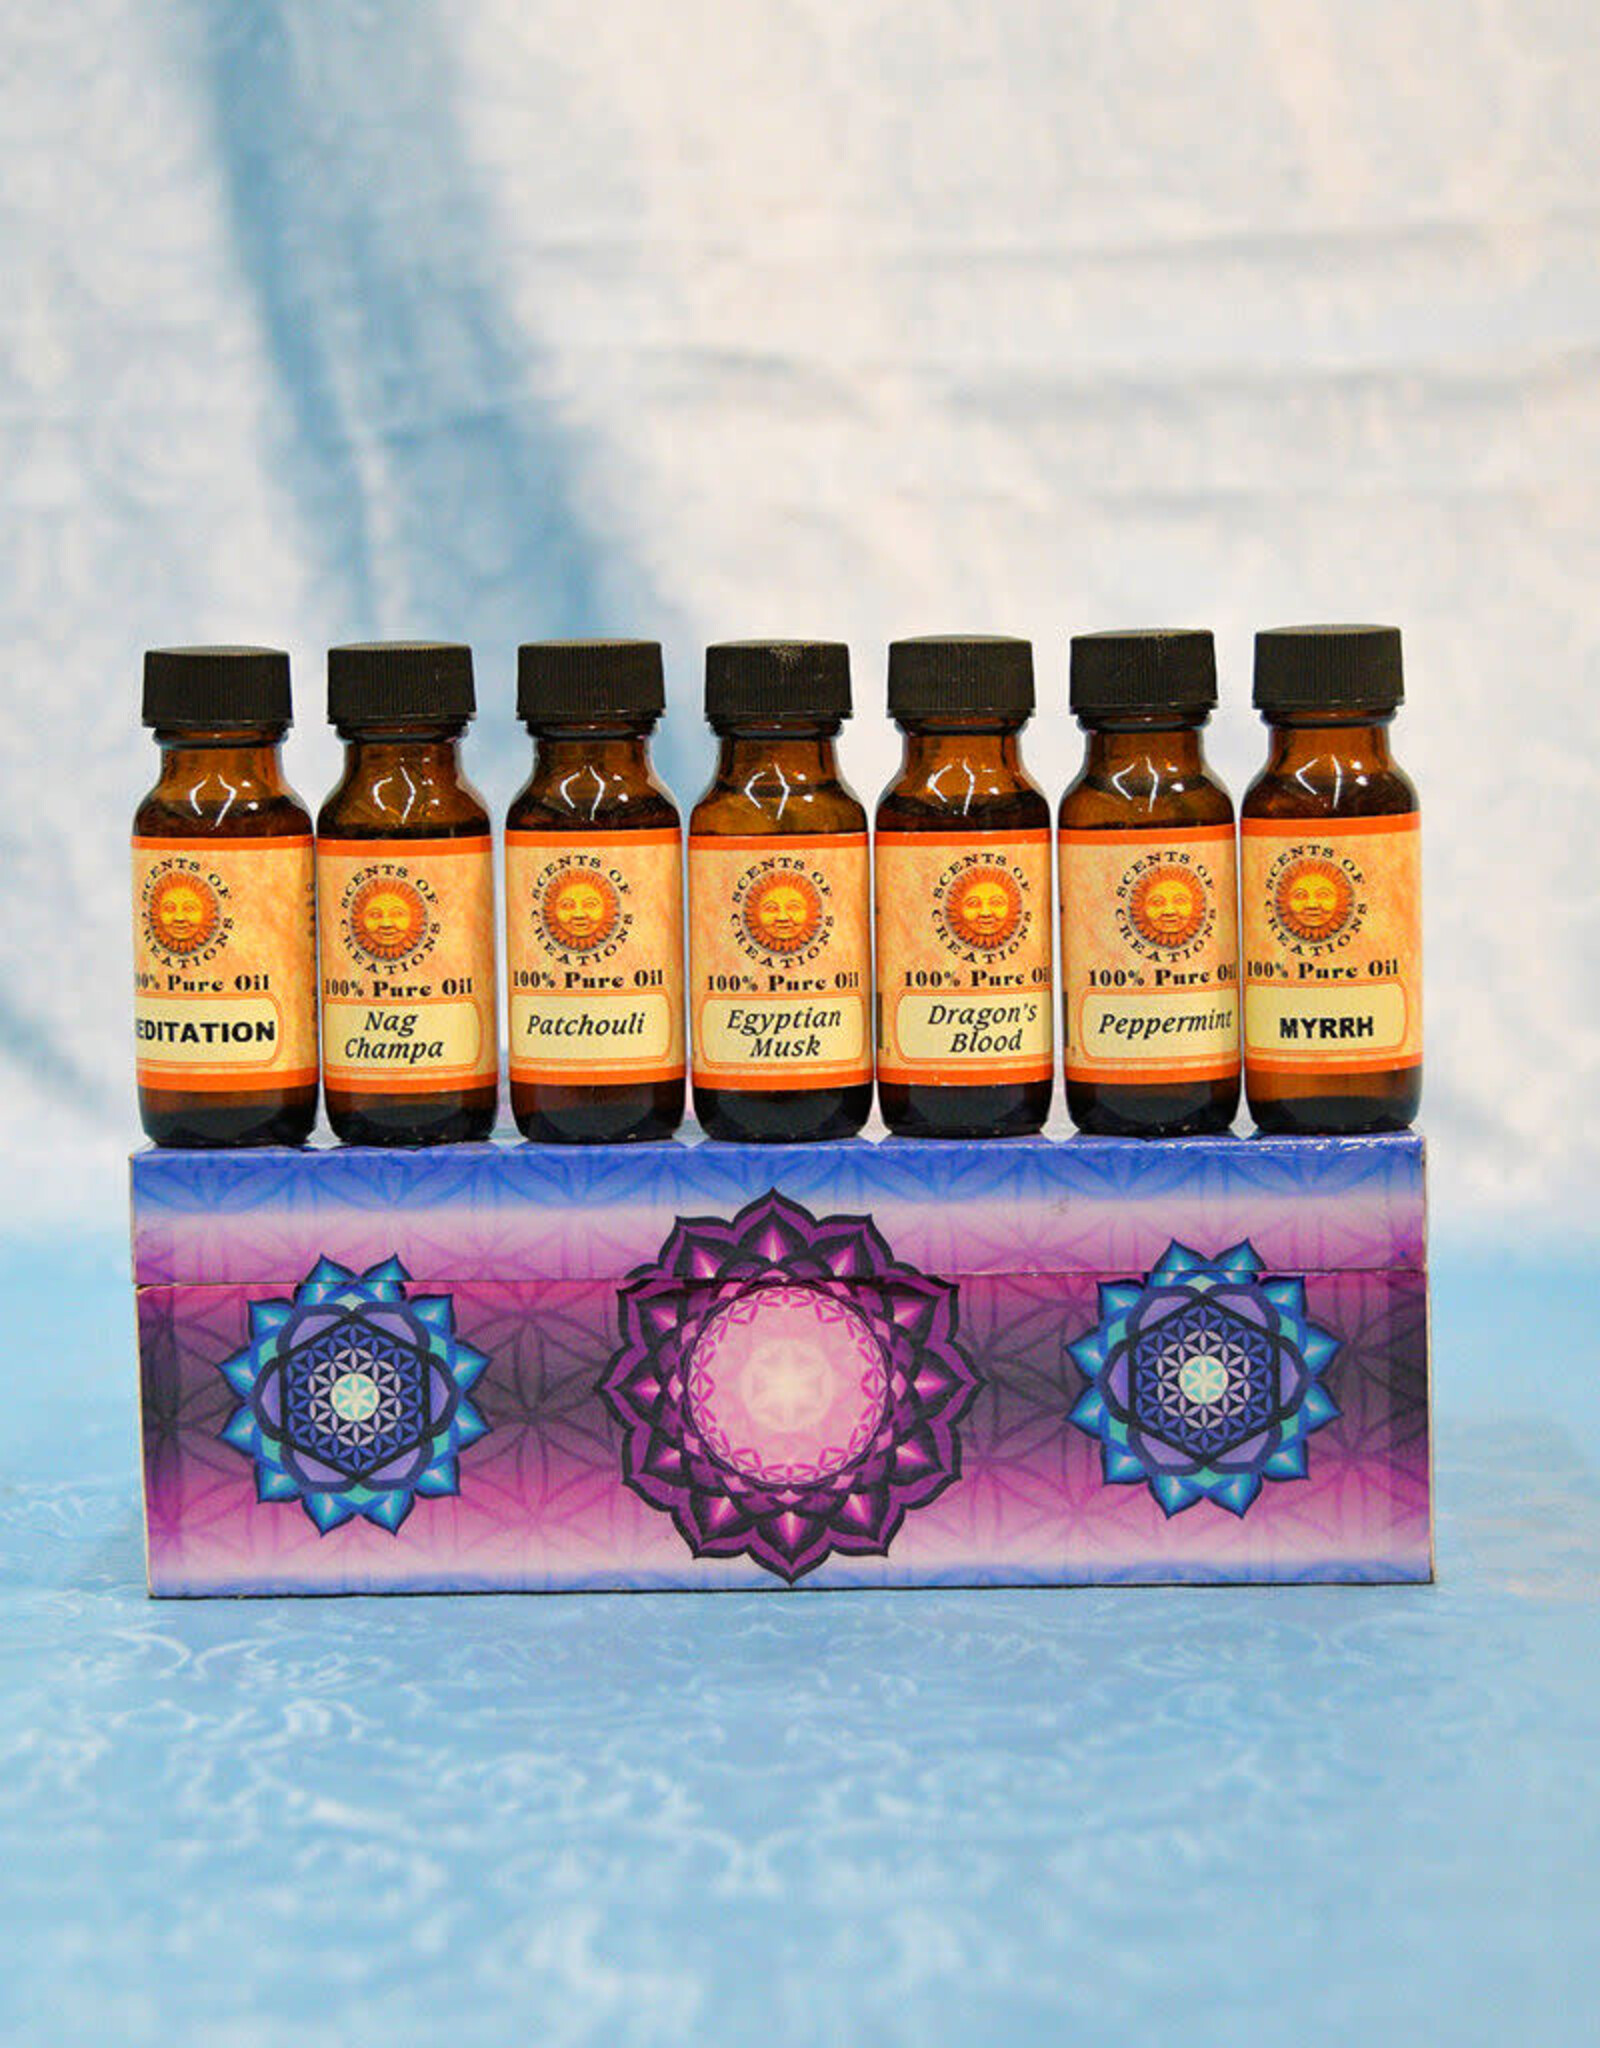 Scents of Creations Scents of Creations Fragrance Oil - Coconut